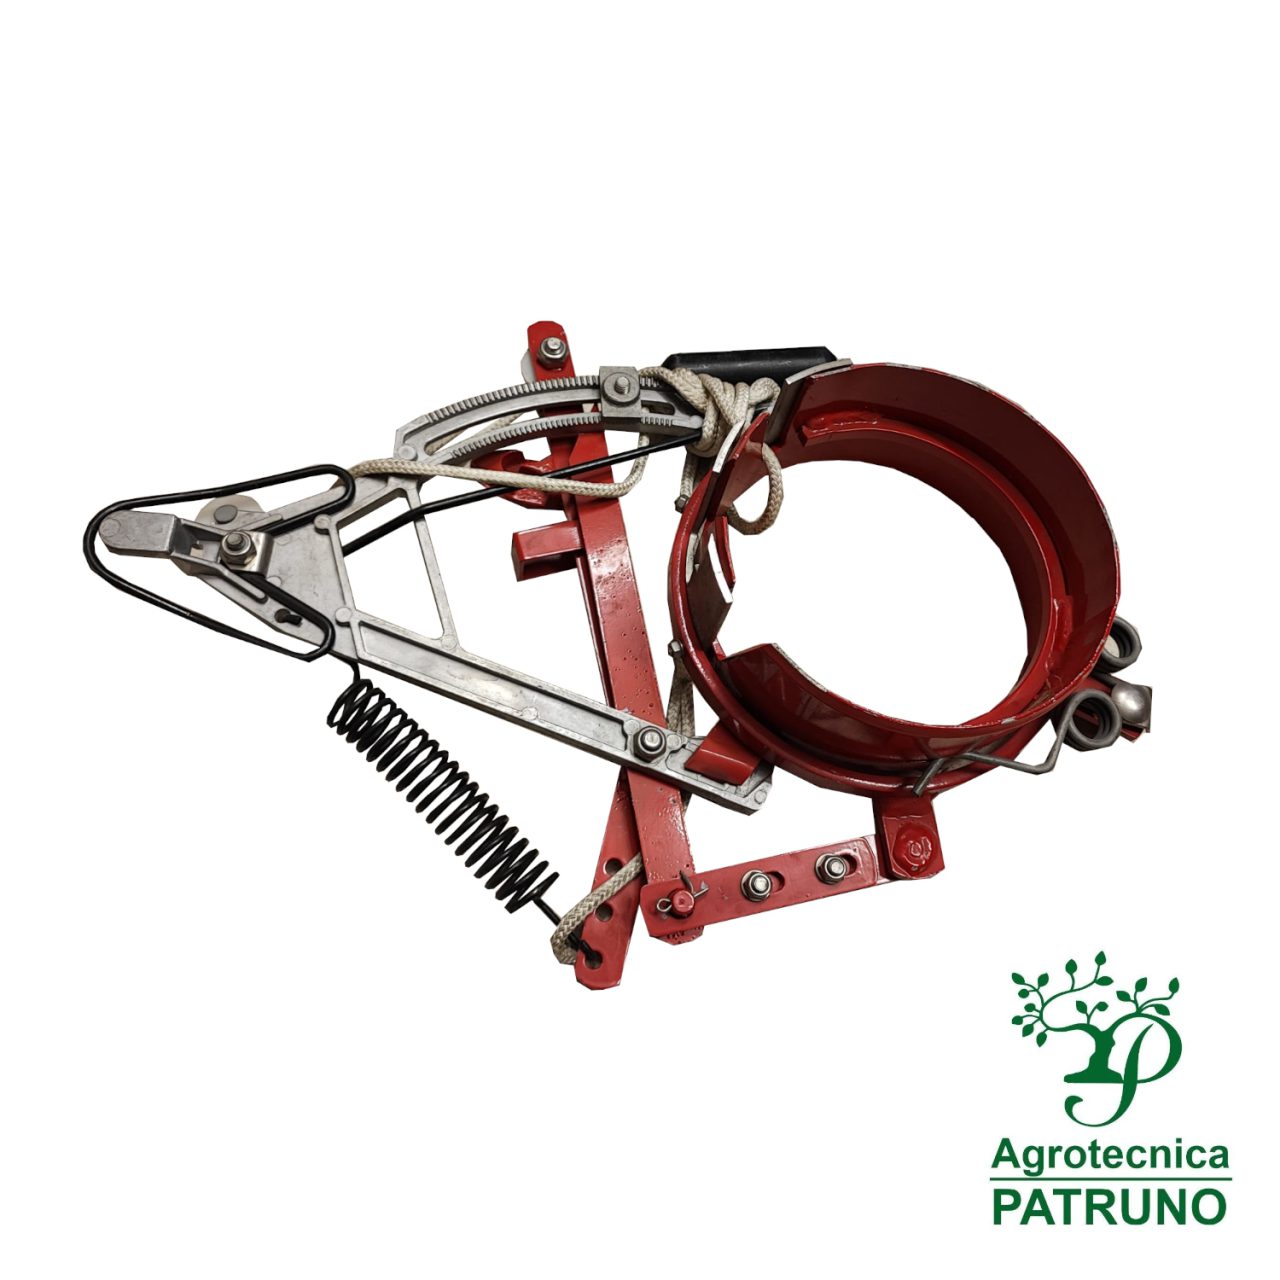 Collare per spandiconcime Lely H 2.3201.0250.0